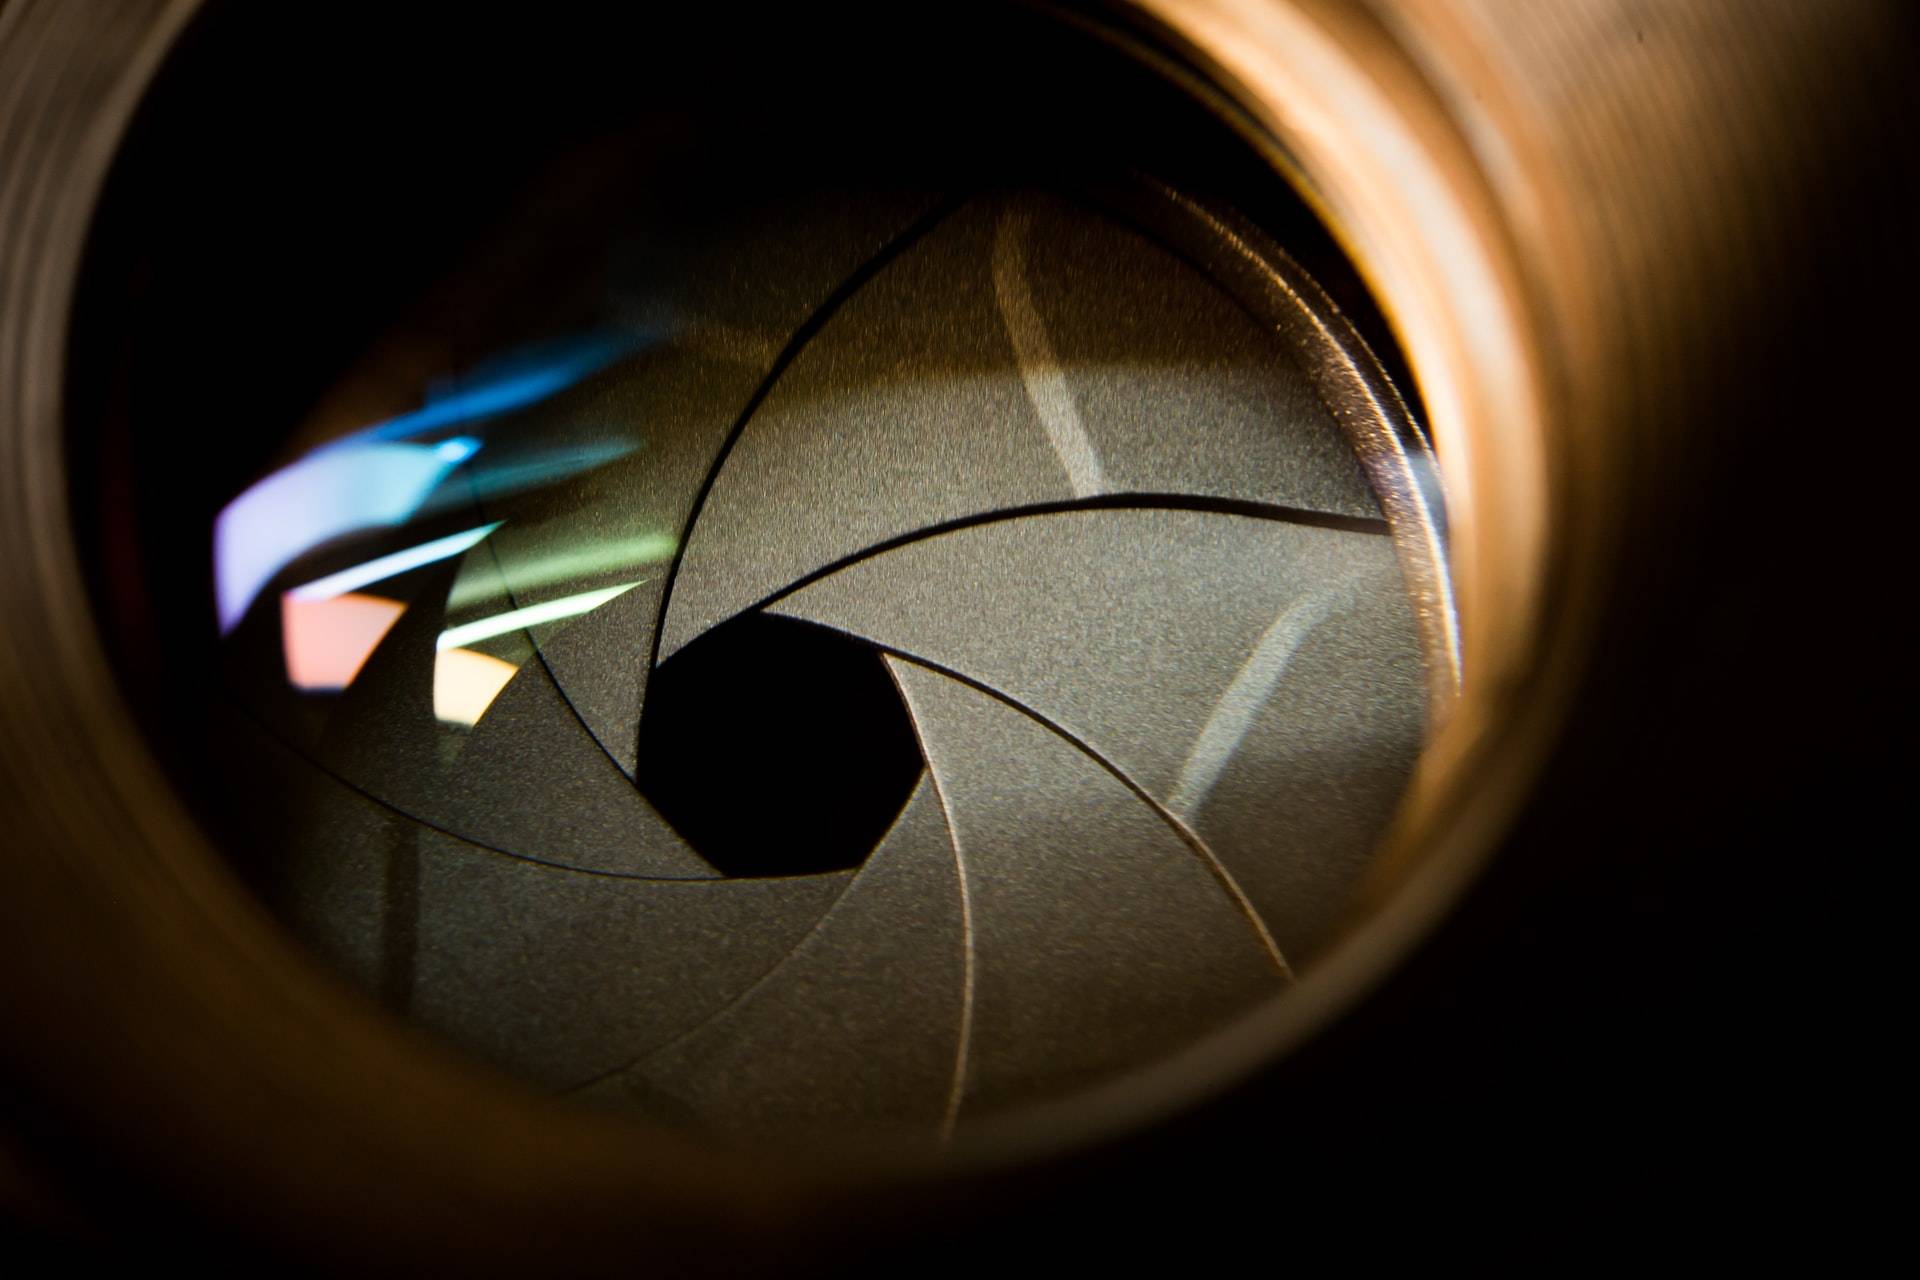 Photo of a camera lens where you can see the opening of the lens in the middle that allows light to pass through